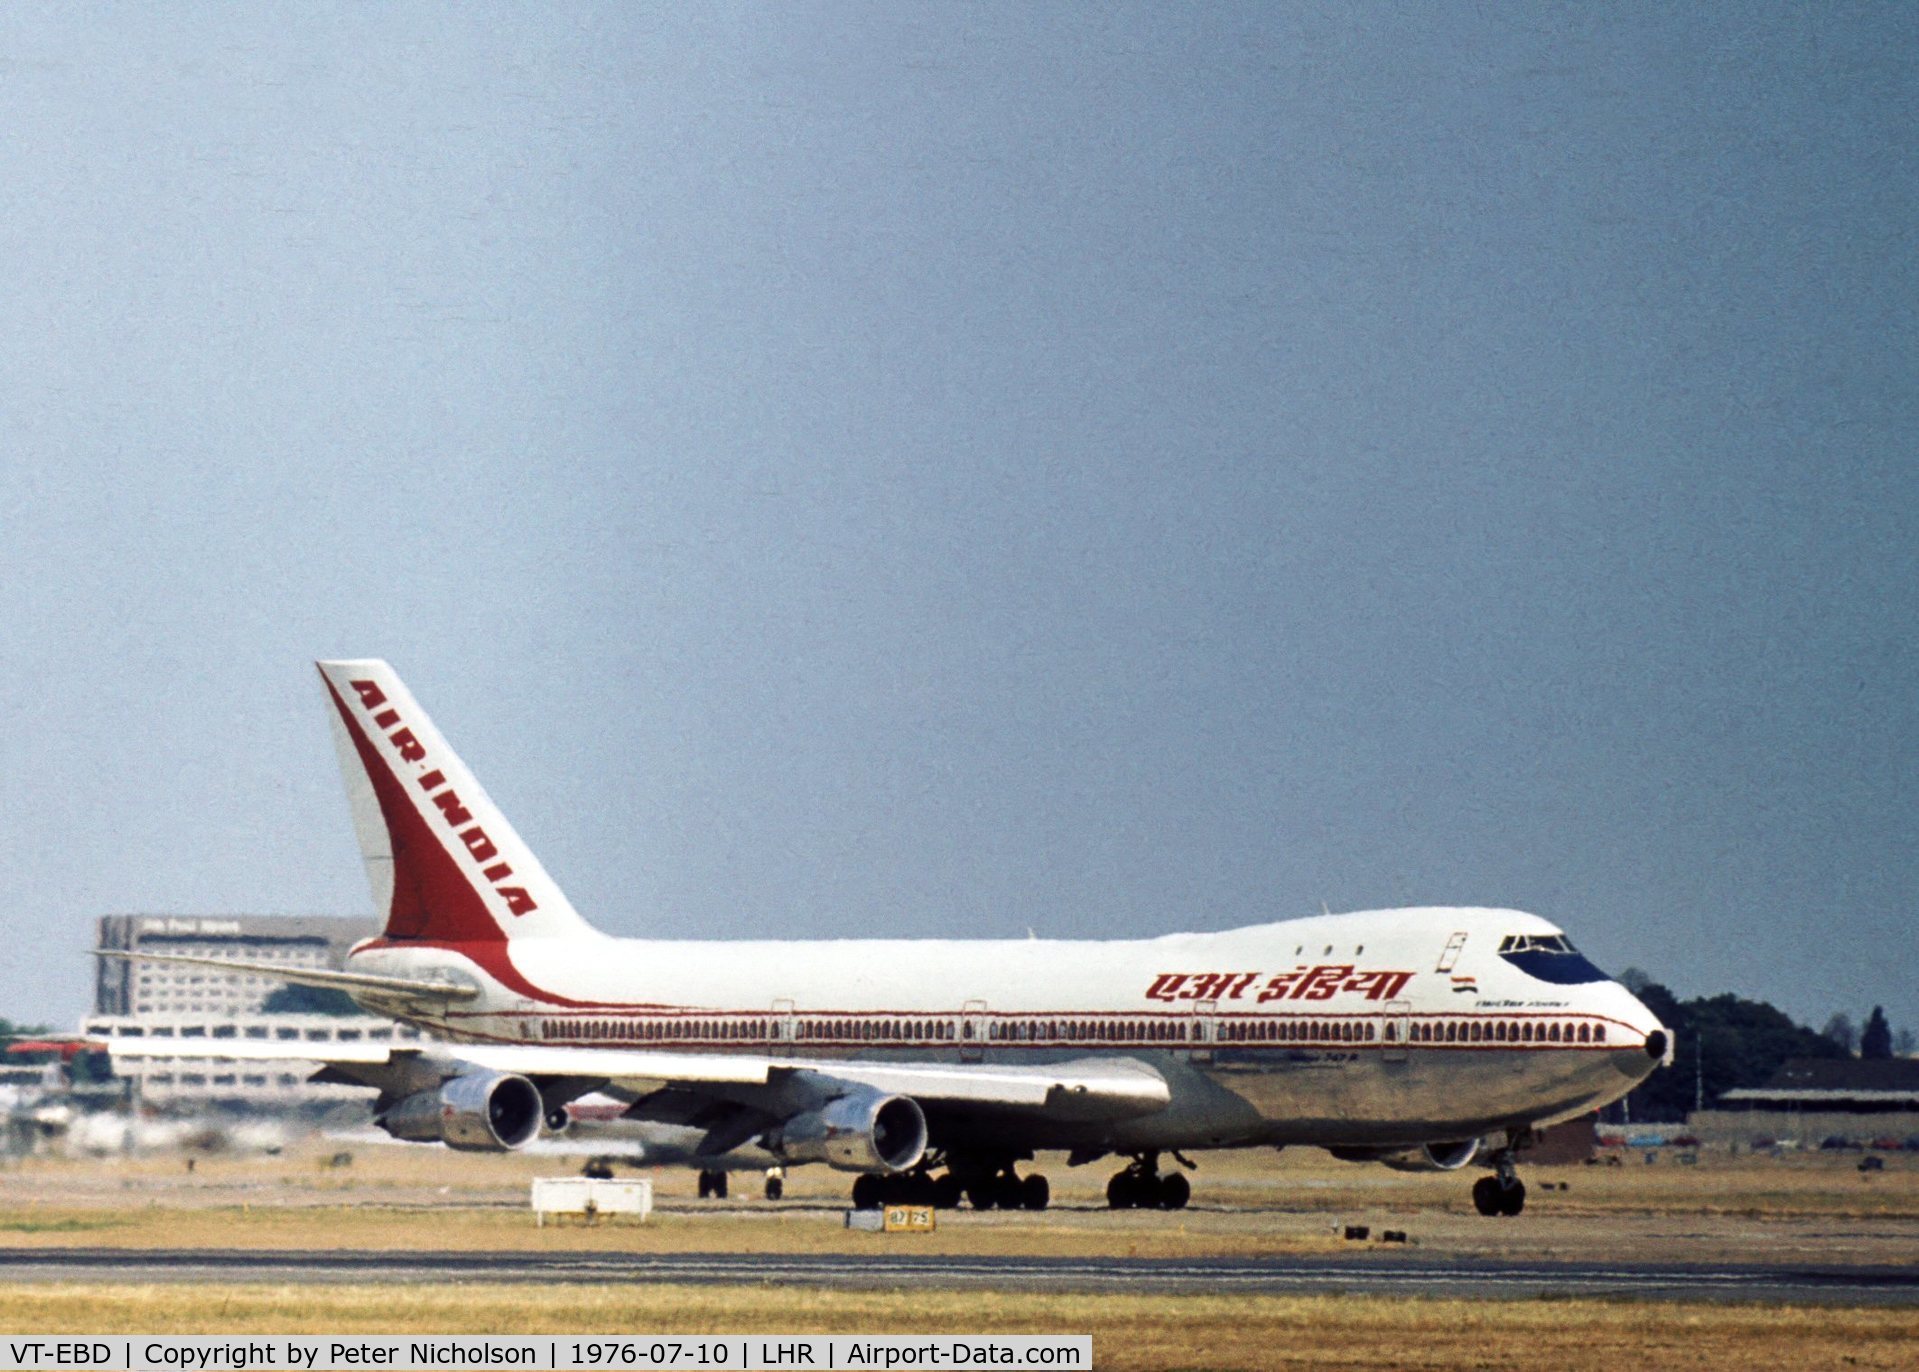 VT-EBD, 1971 Boeing 747-237B C/N 19959, Air India operated this Boeing 747 named 